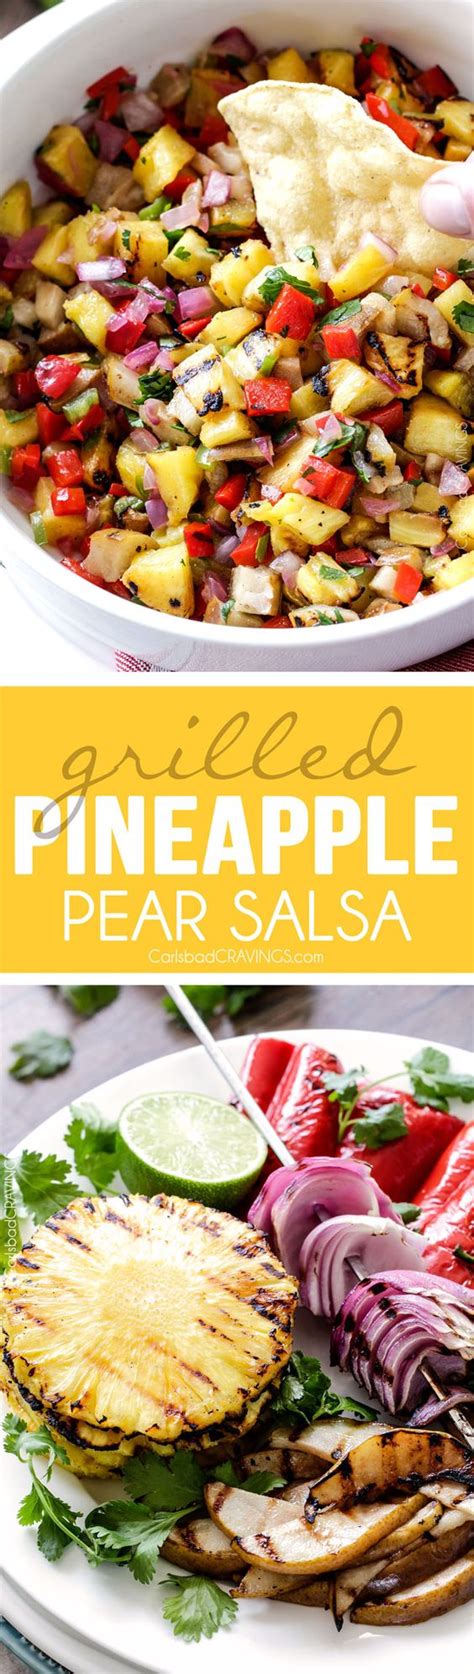 Be careful and take your time! Sweet and smoky Grilled Pineapple Pear Salsa - the ...